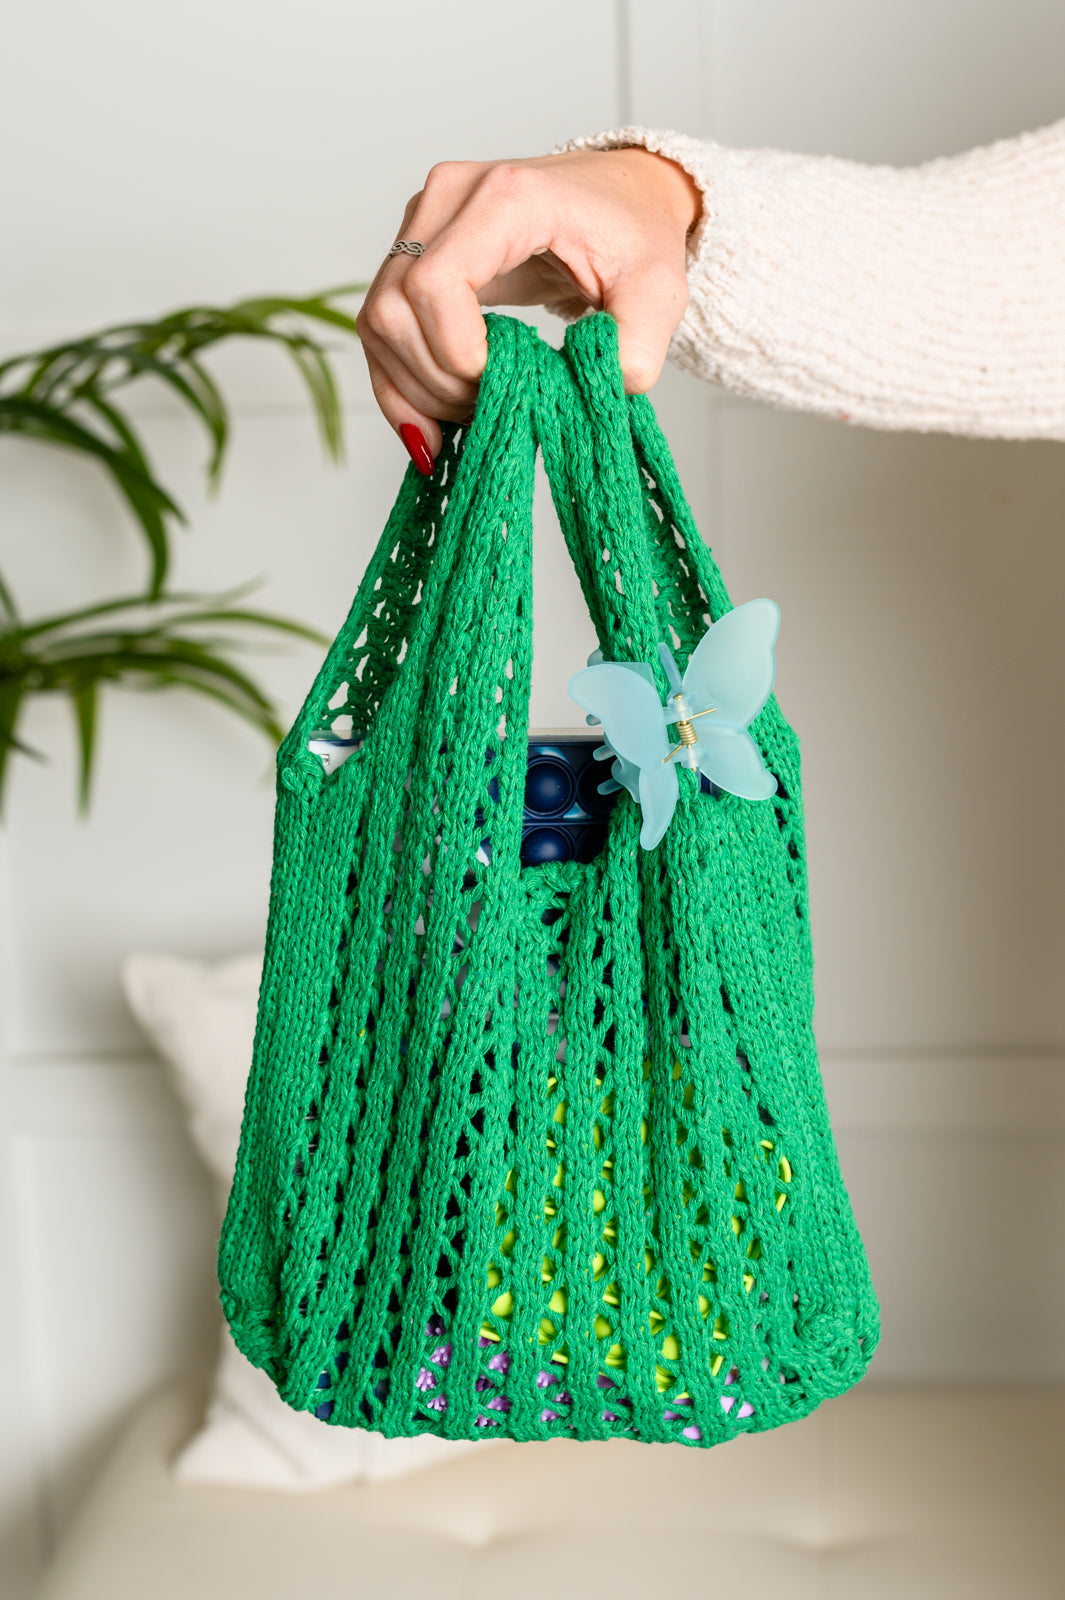 Girls Day Open Weave Bag in Green Ave Shops